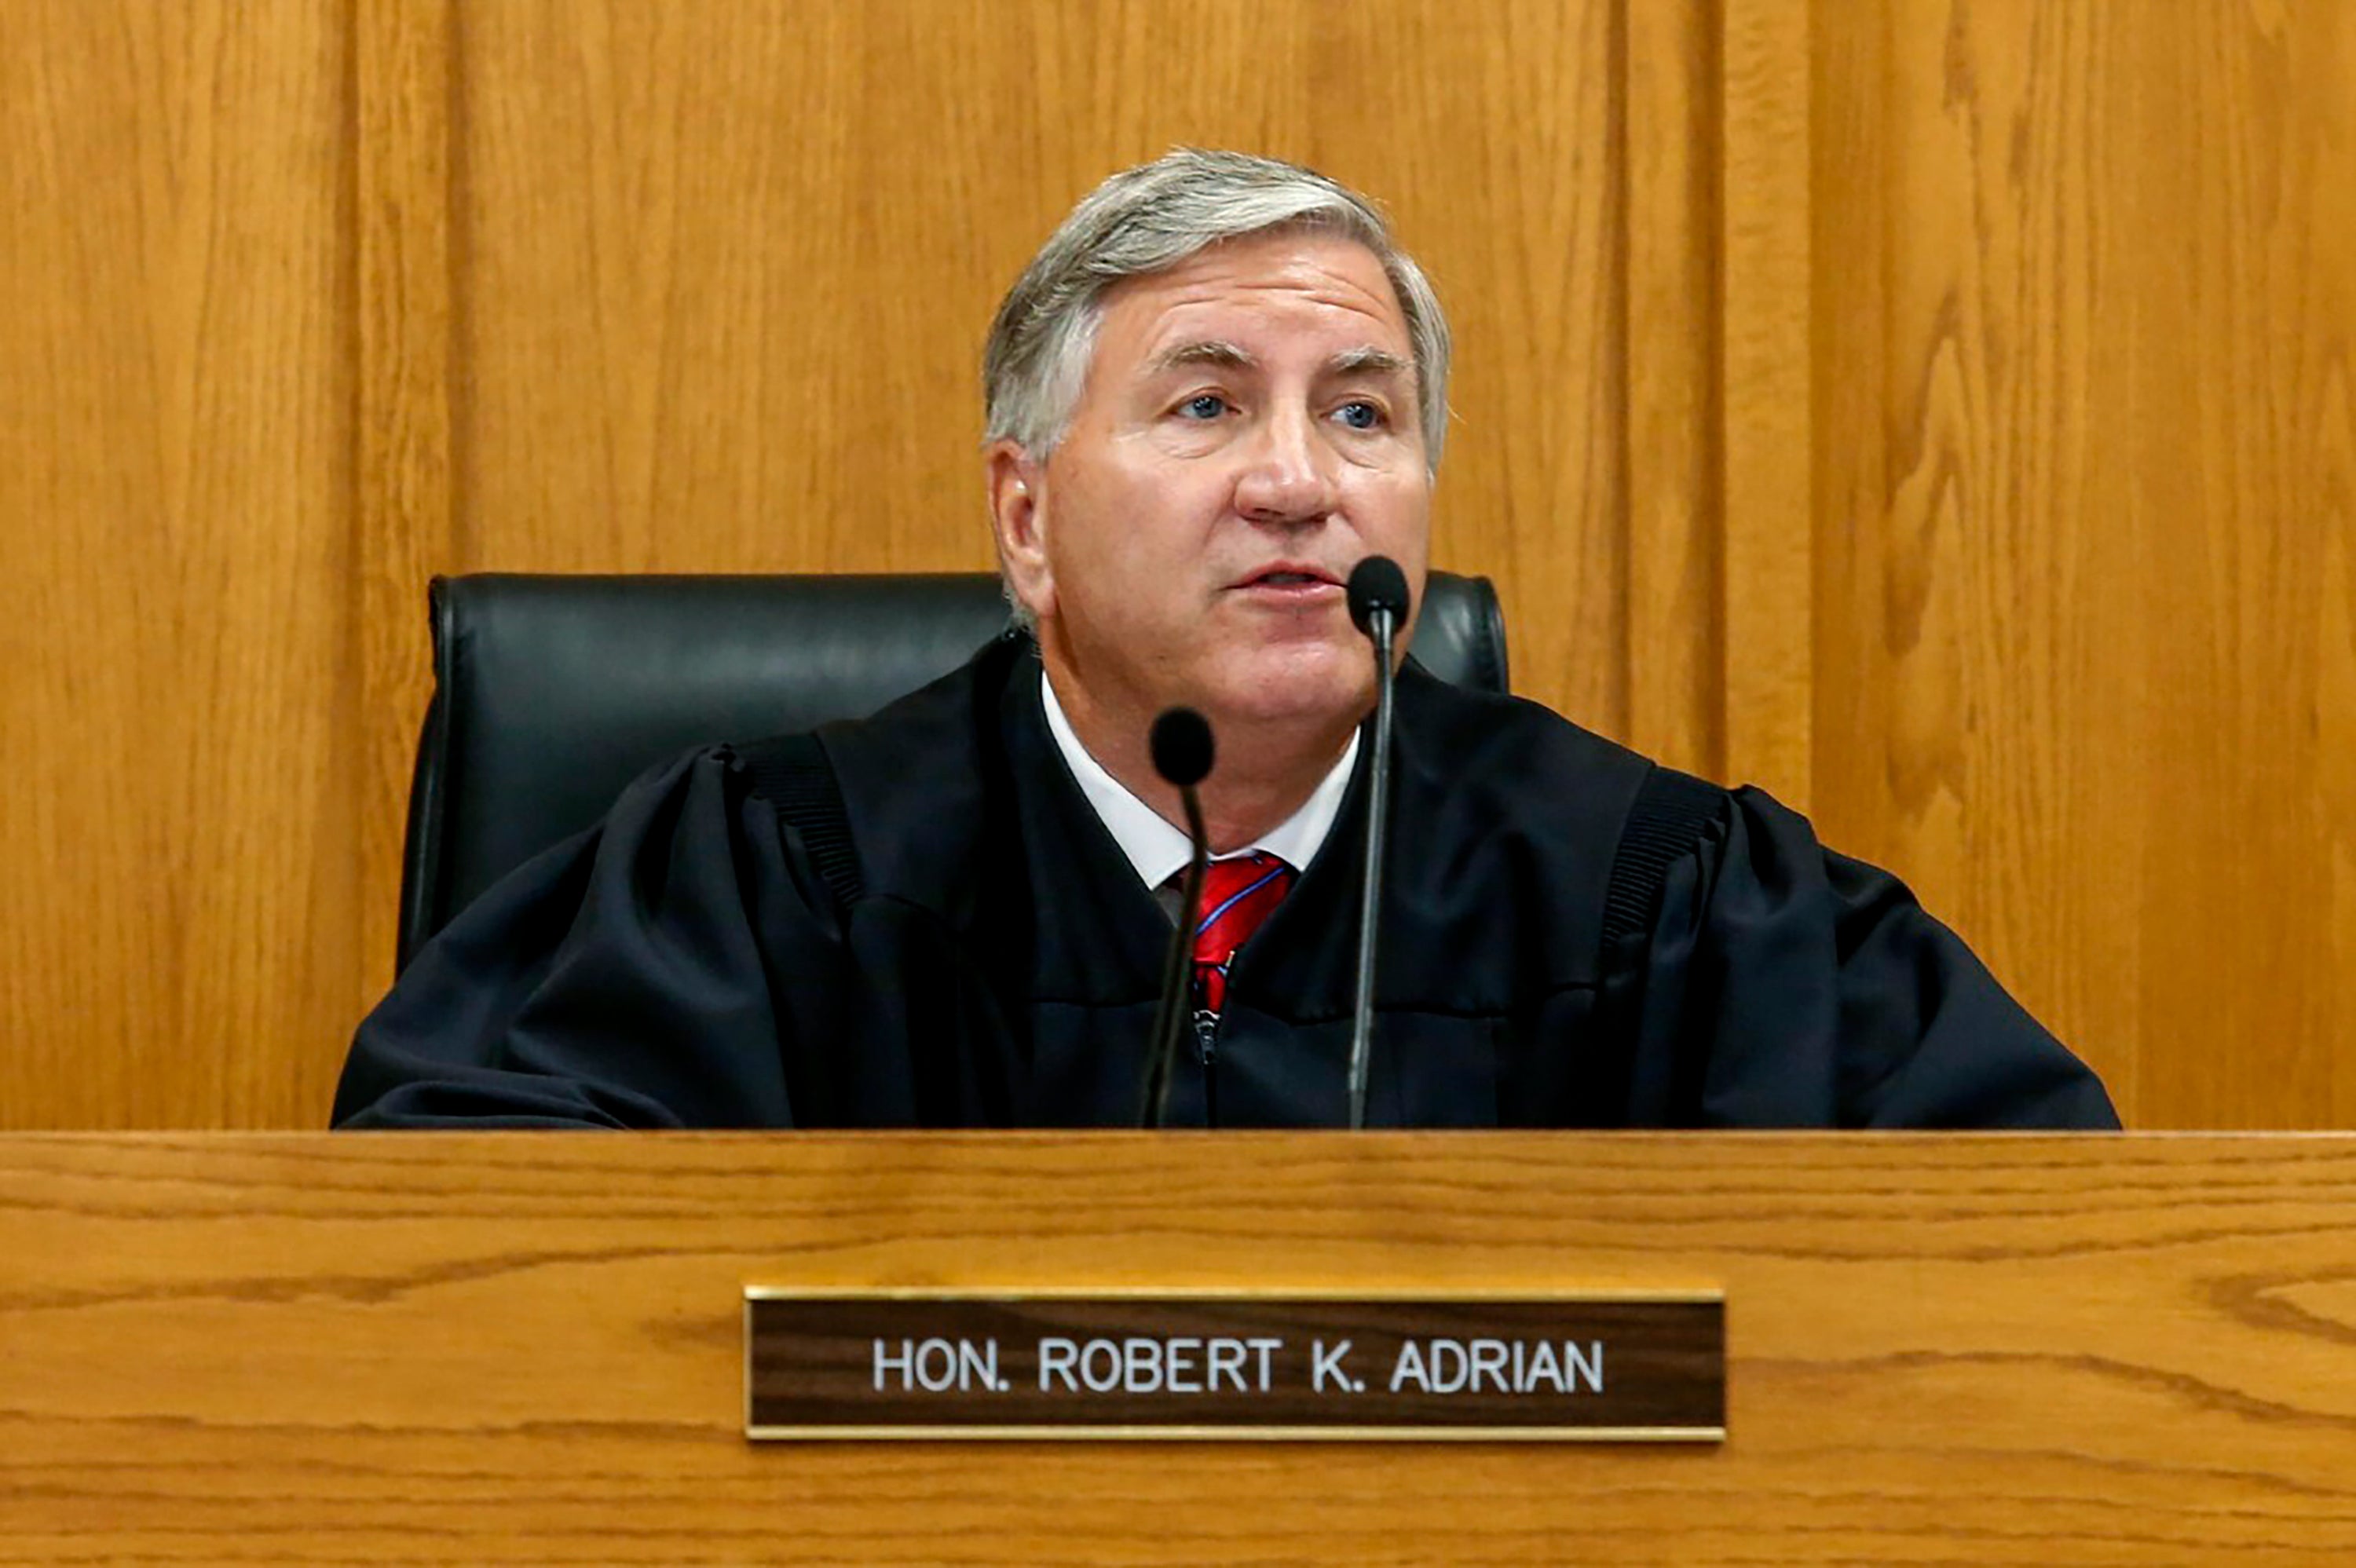 Judge Robert Adrian said Drew Clinton had received ‘plenty of punishment’ already after serving five months in county jail